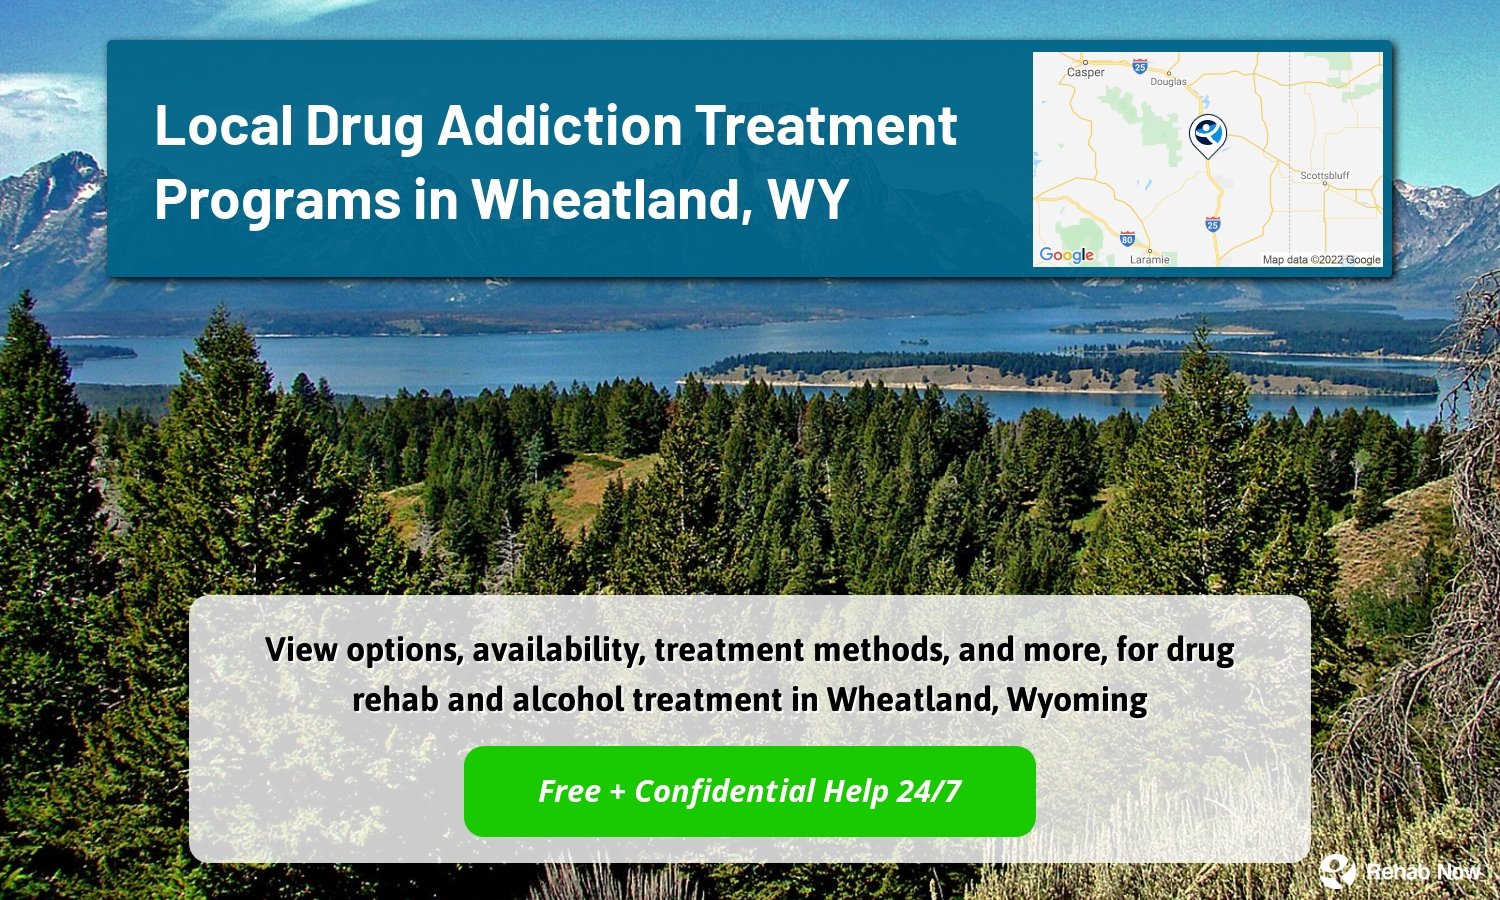 View options, availability, treatment methods, and more, for drug rehab and alcohol treatment in Wheatland, Wyoming